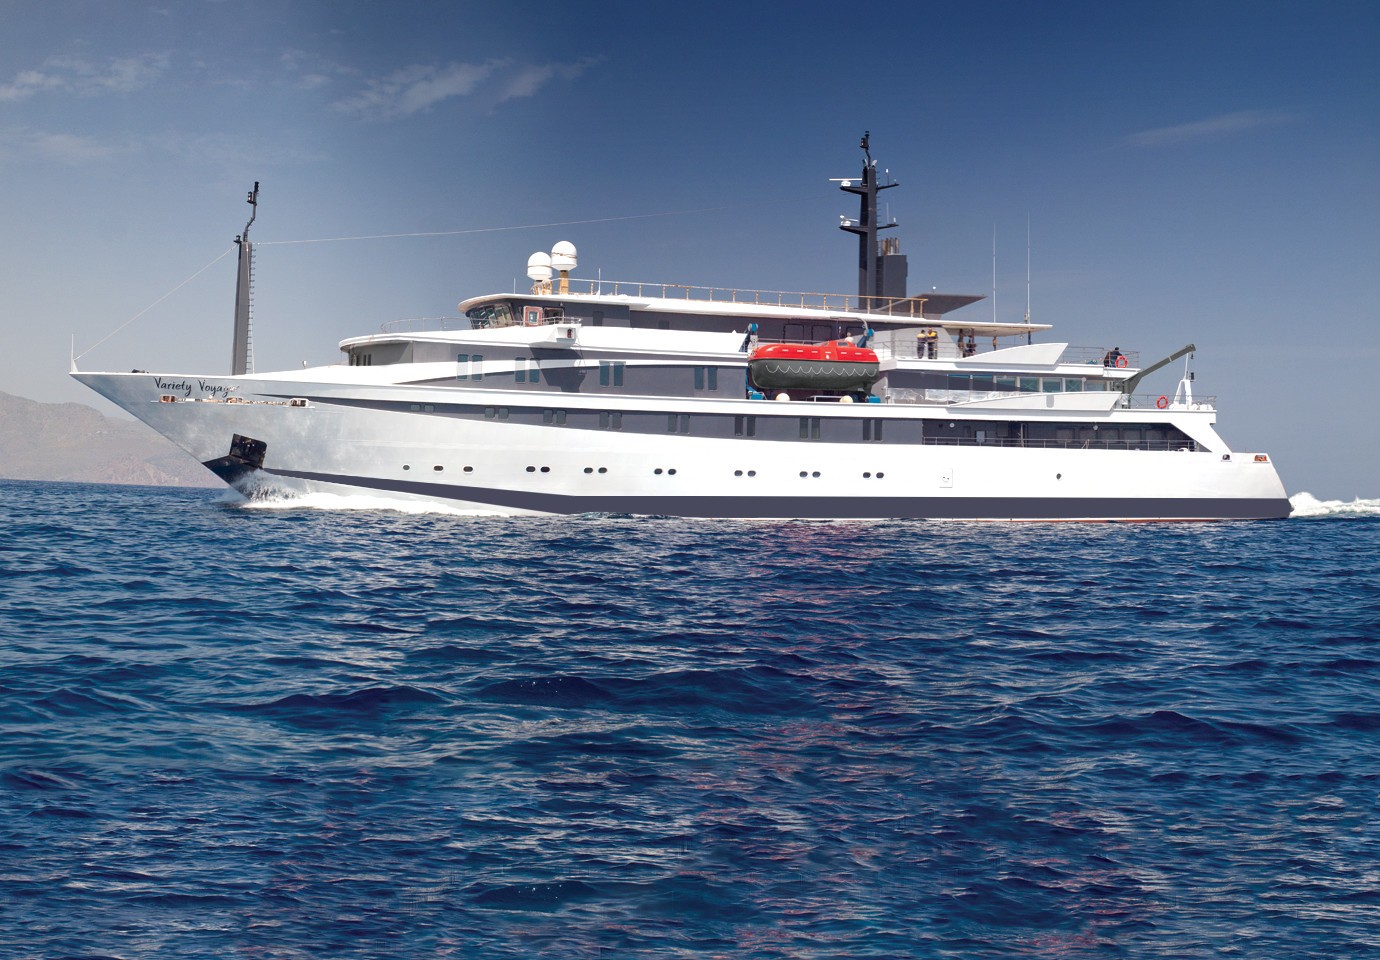 The 68m Yacht VARIETY VOYAGER